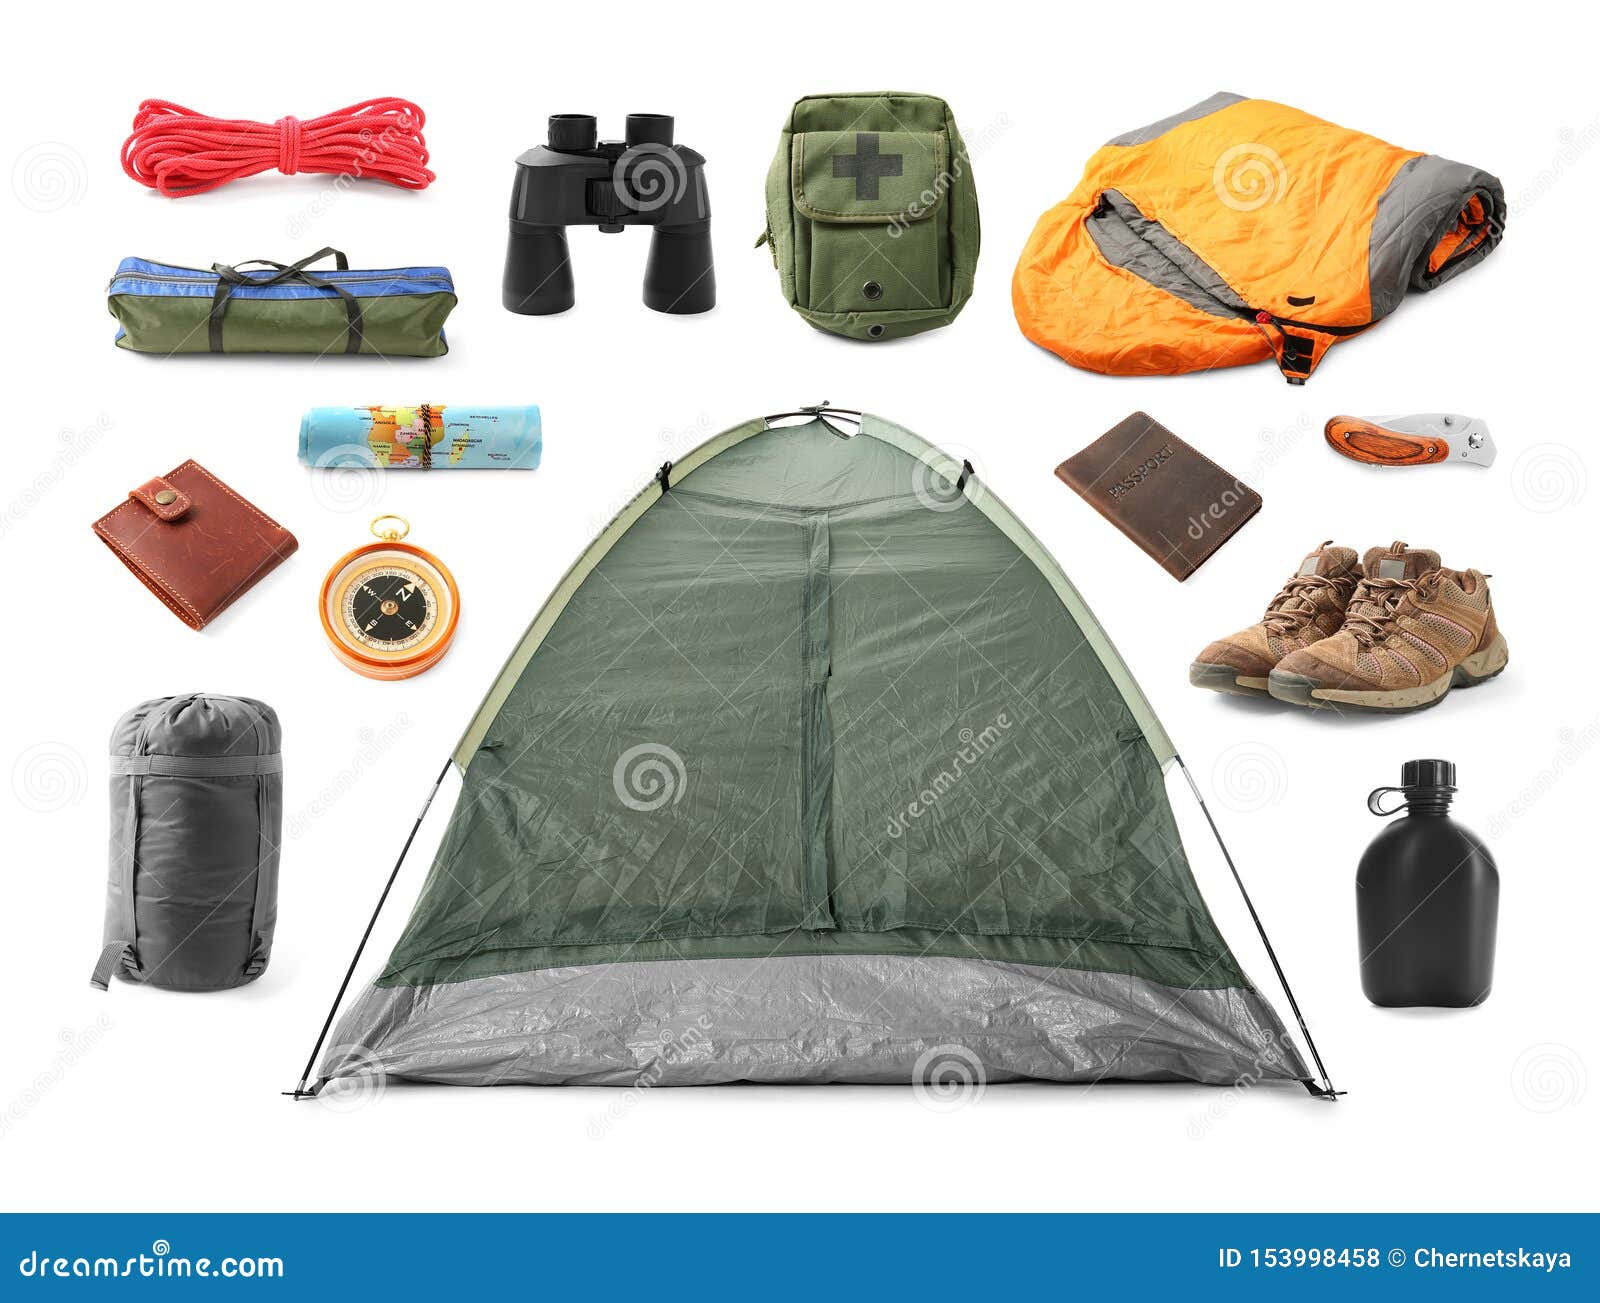 Camping Equipment Isolated: Over 71,201 Royalty-Free Licensable